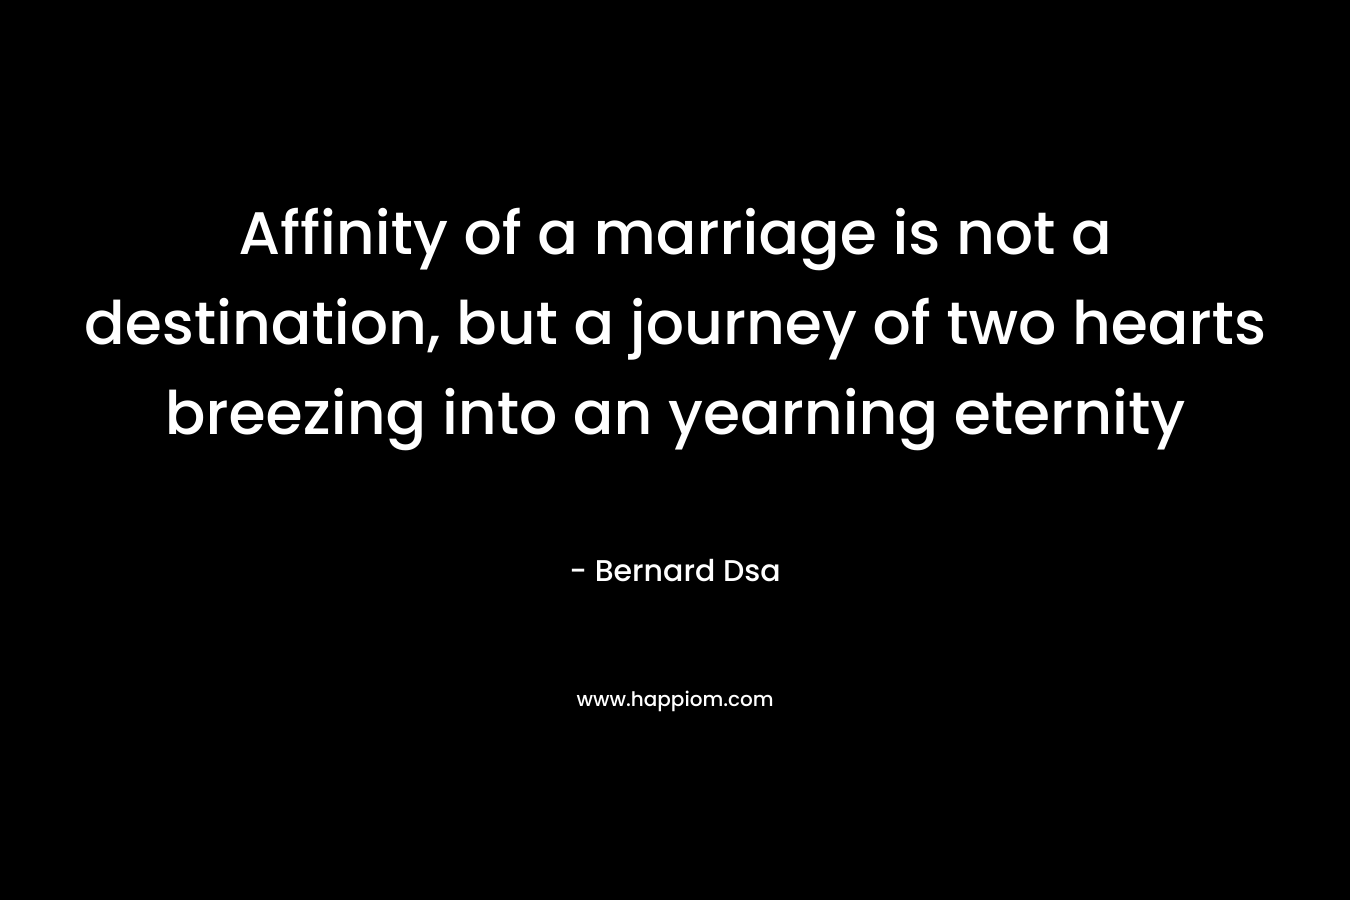 Affinity of a marriage is not a destination, but a journey of two hearts breezing into an yearning eternity – Bernard Dsa